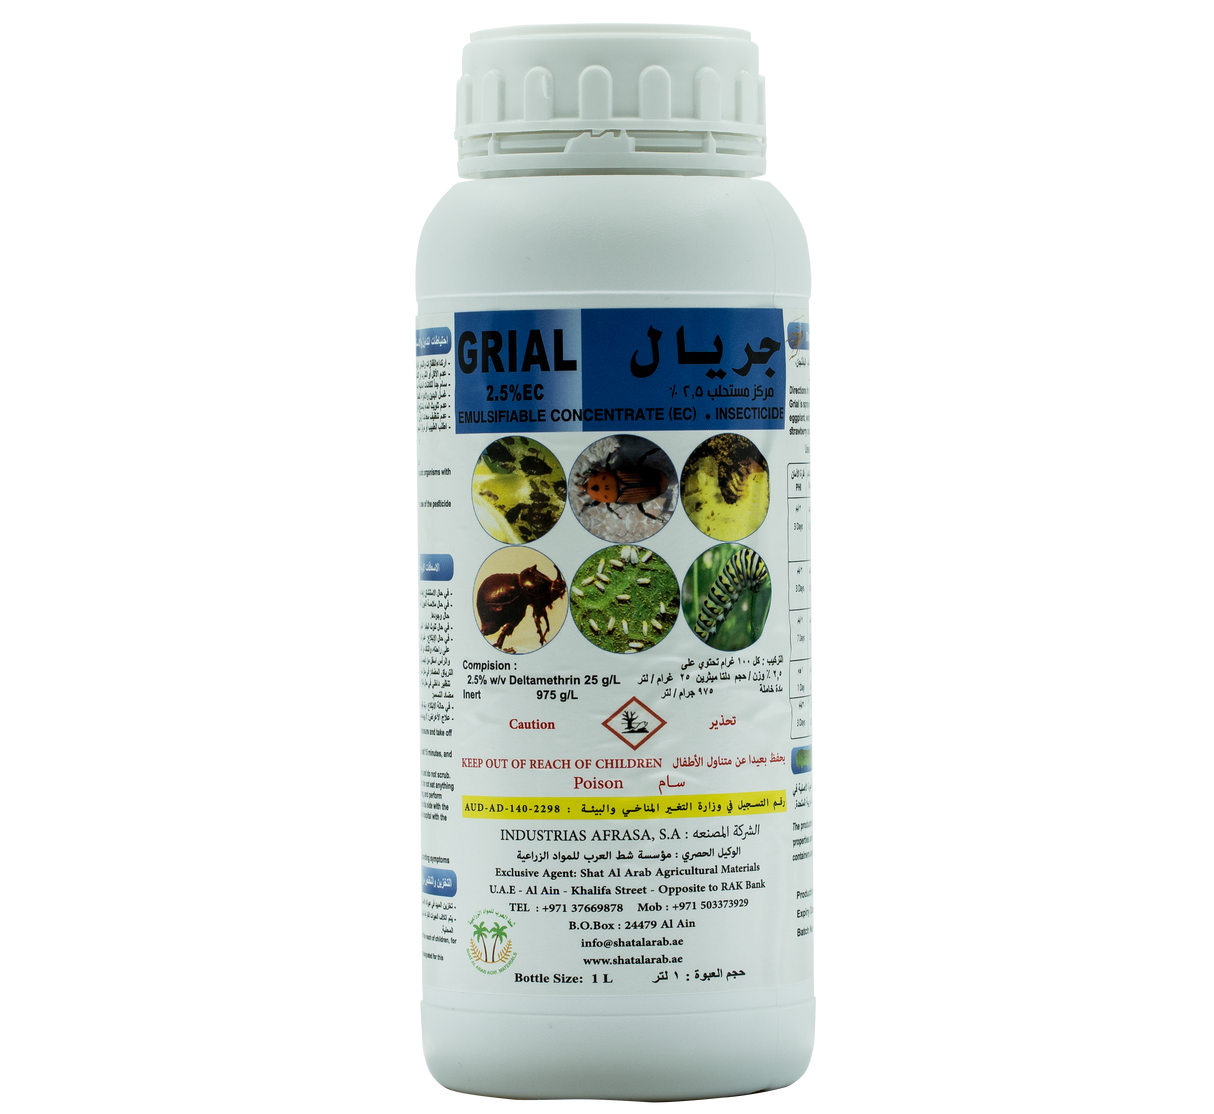 Grial Insecticide 2.5% EC